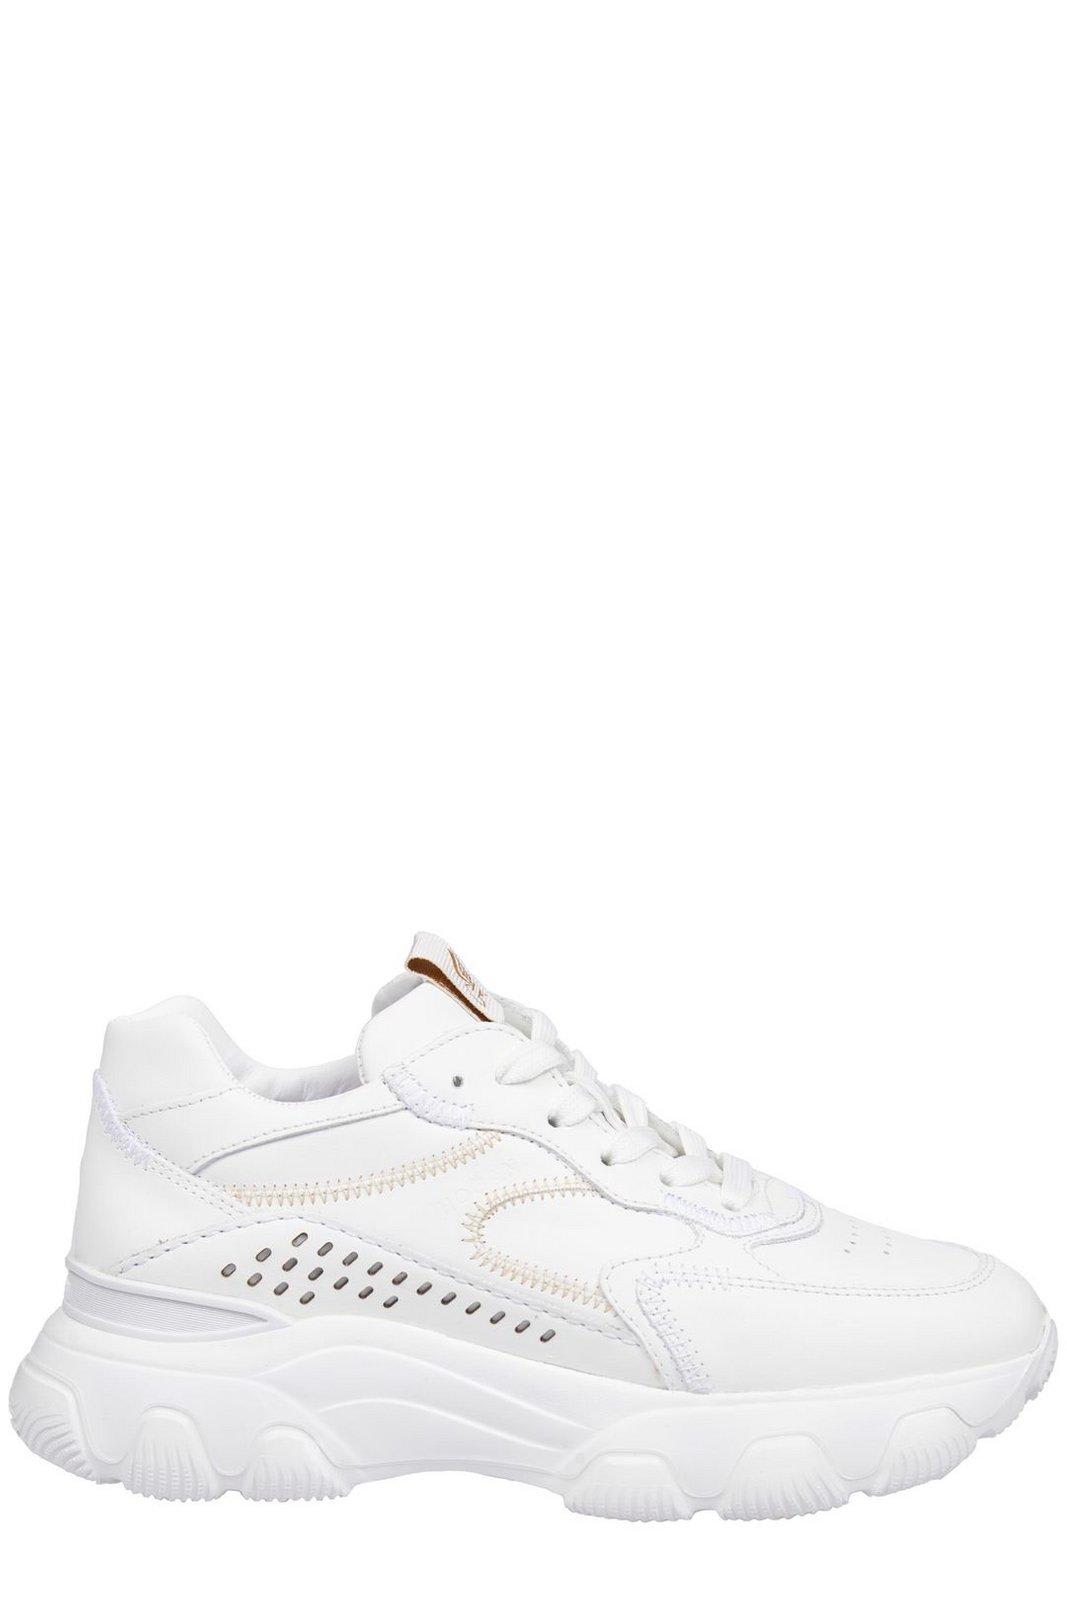 Hogan Hyperactive Lace-up Sneakers In White | ModeSens